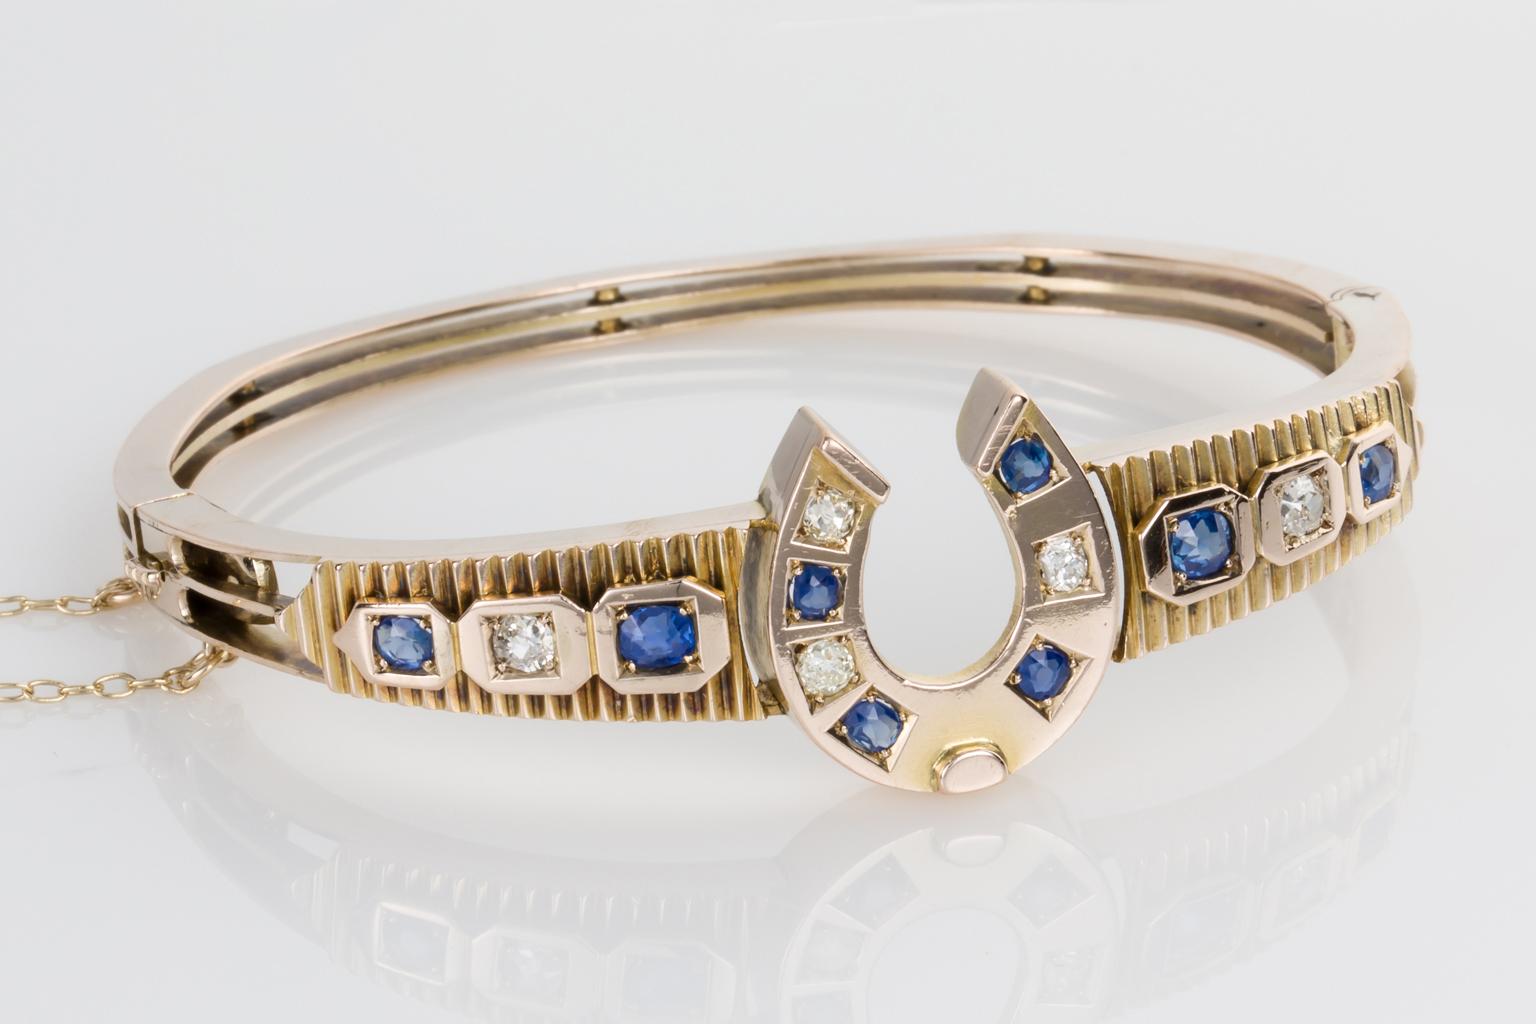 For good luck or for horse lovers, a vintage bangle that would make a lovely 18th or 21st gift. Set with 8 pretty blue sapphires and 5 old European cut diamonds mounted in 9 karat yellow gold. The bangle is hinged so it is easy to put on and take